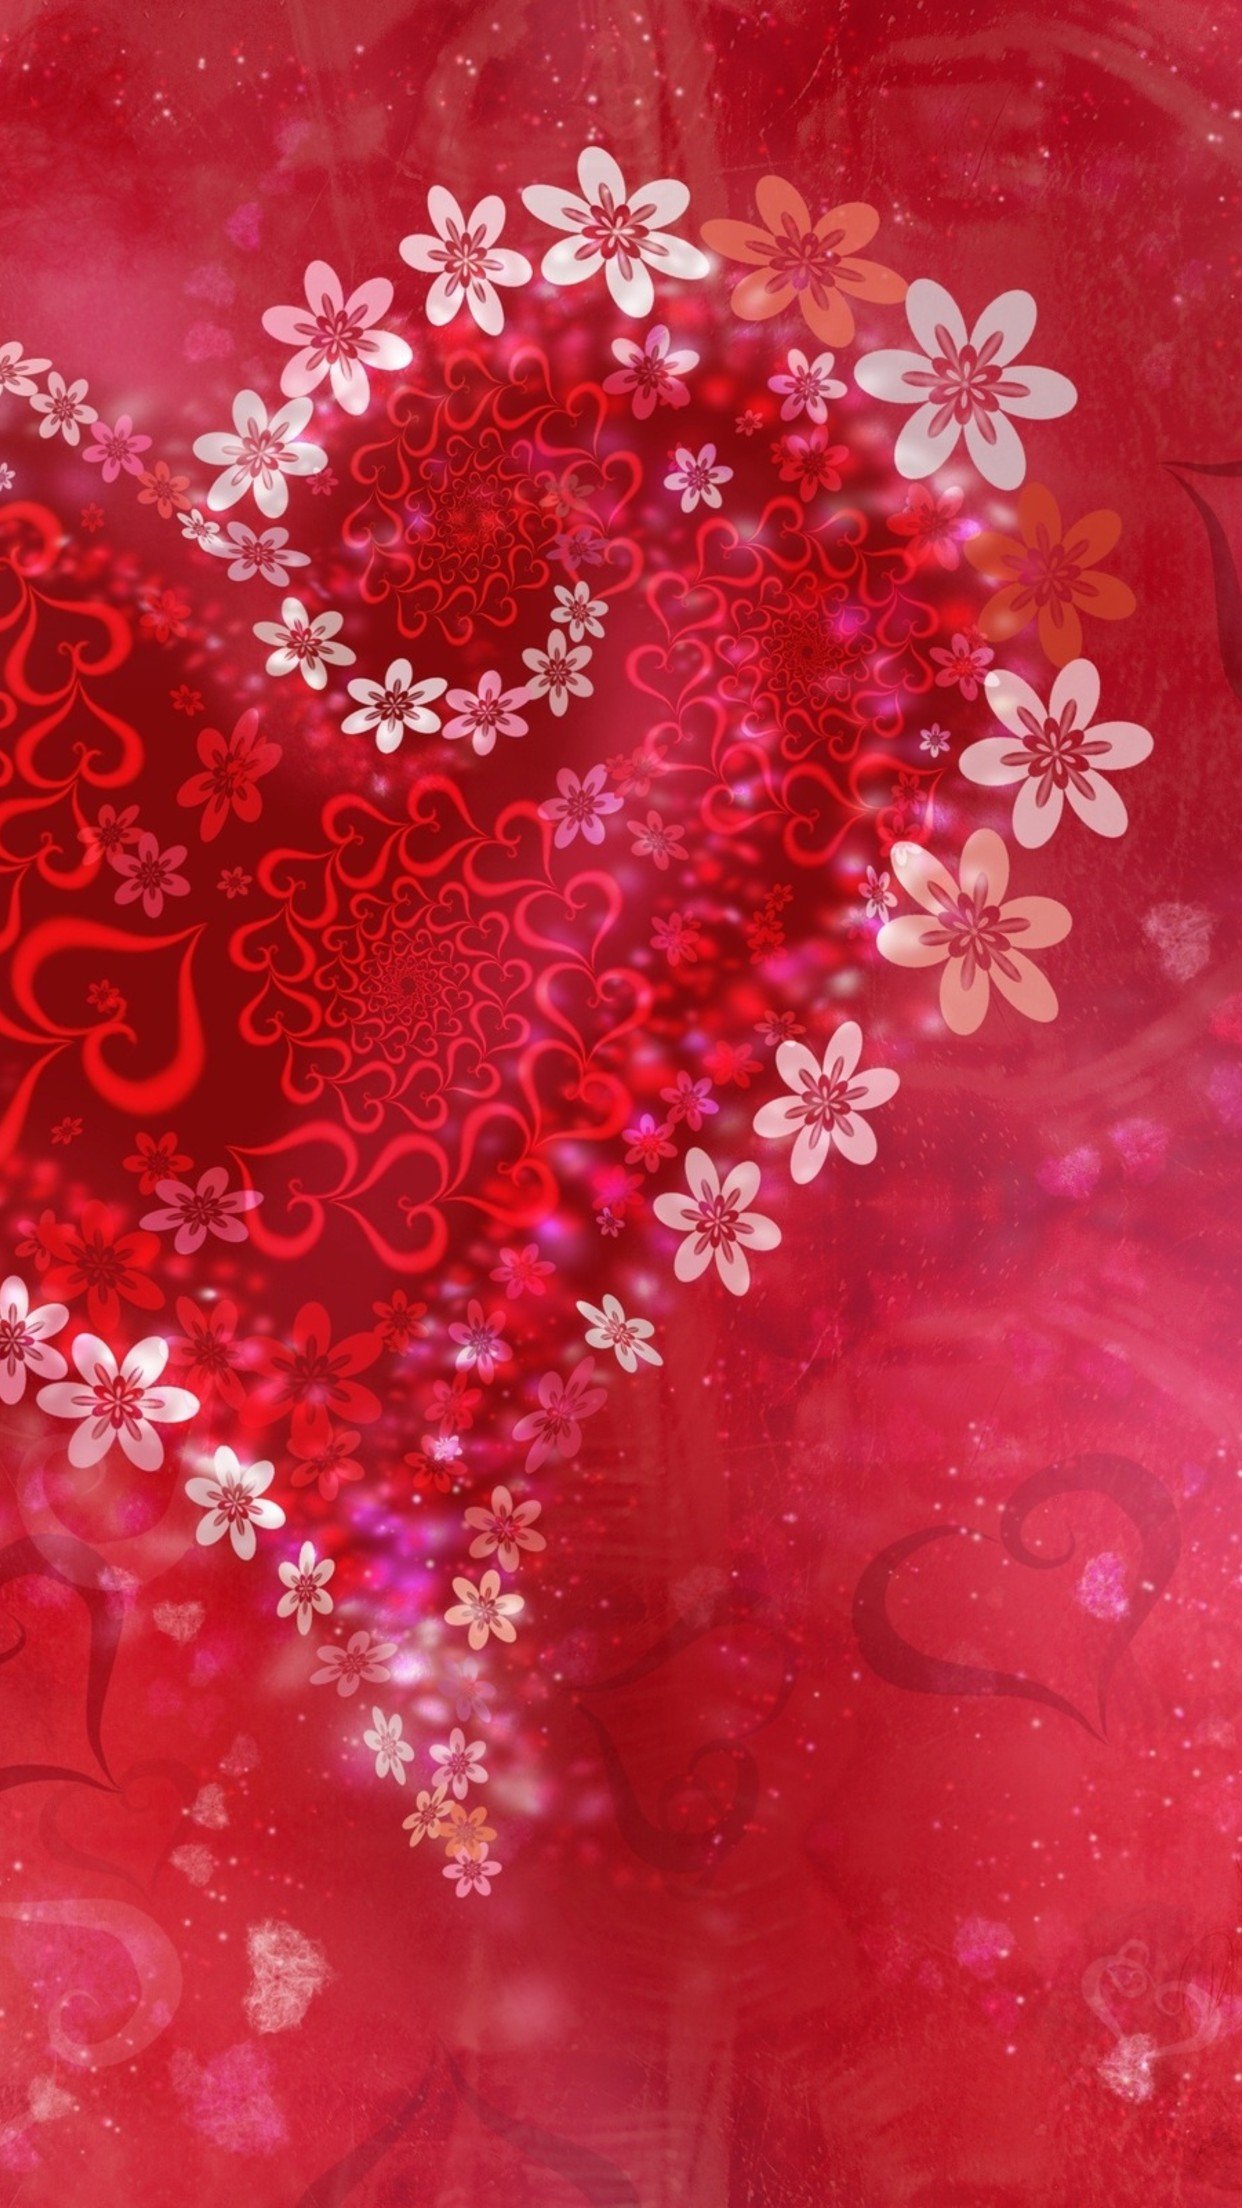 Valentine Day Flower Wallpaper for iPhone Pro Max, X, 6